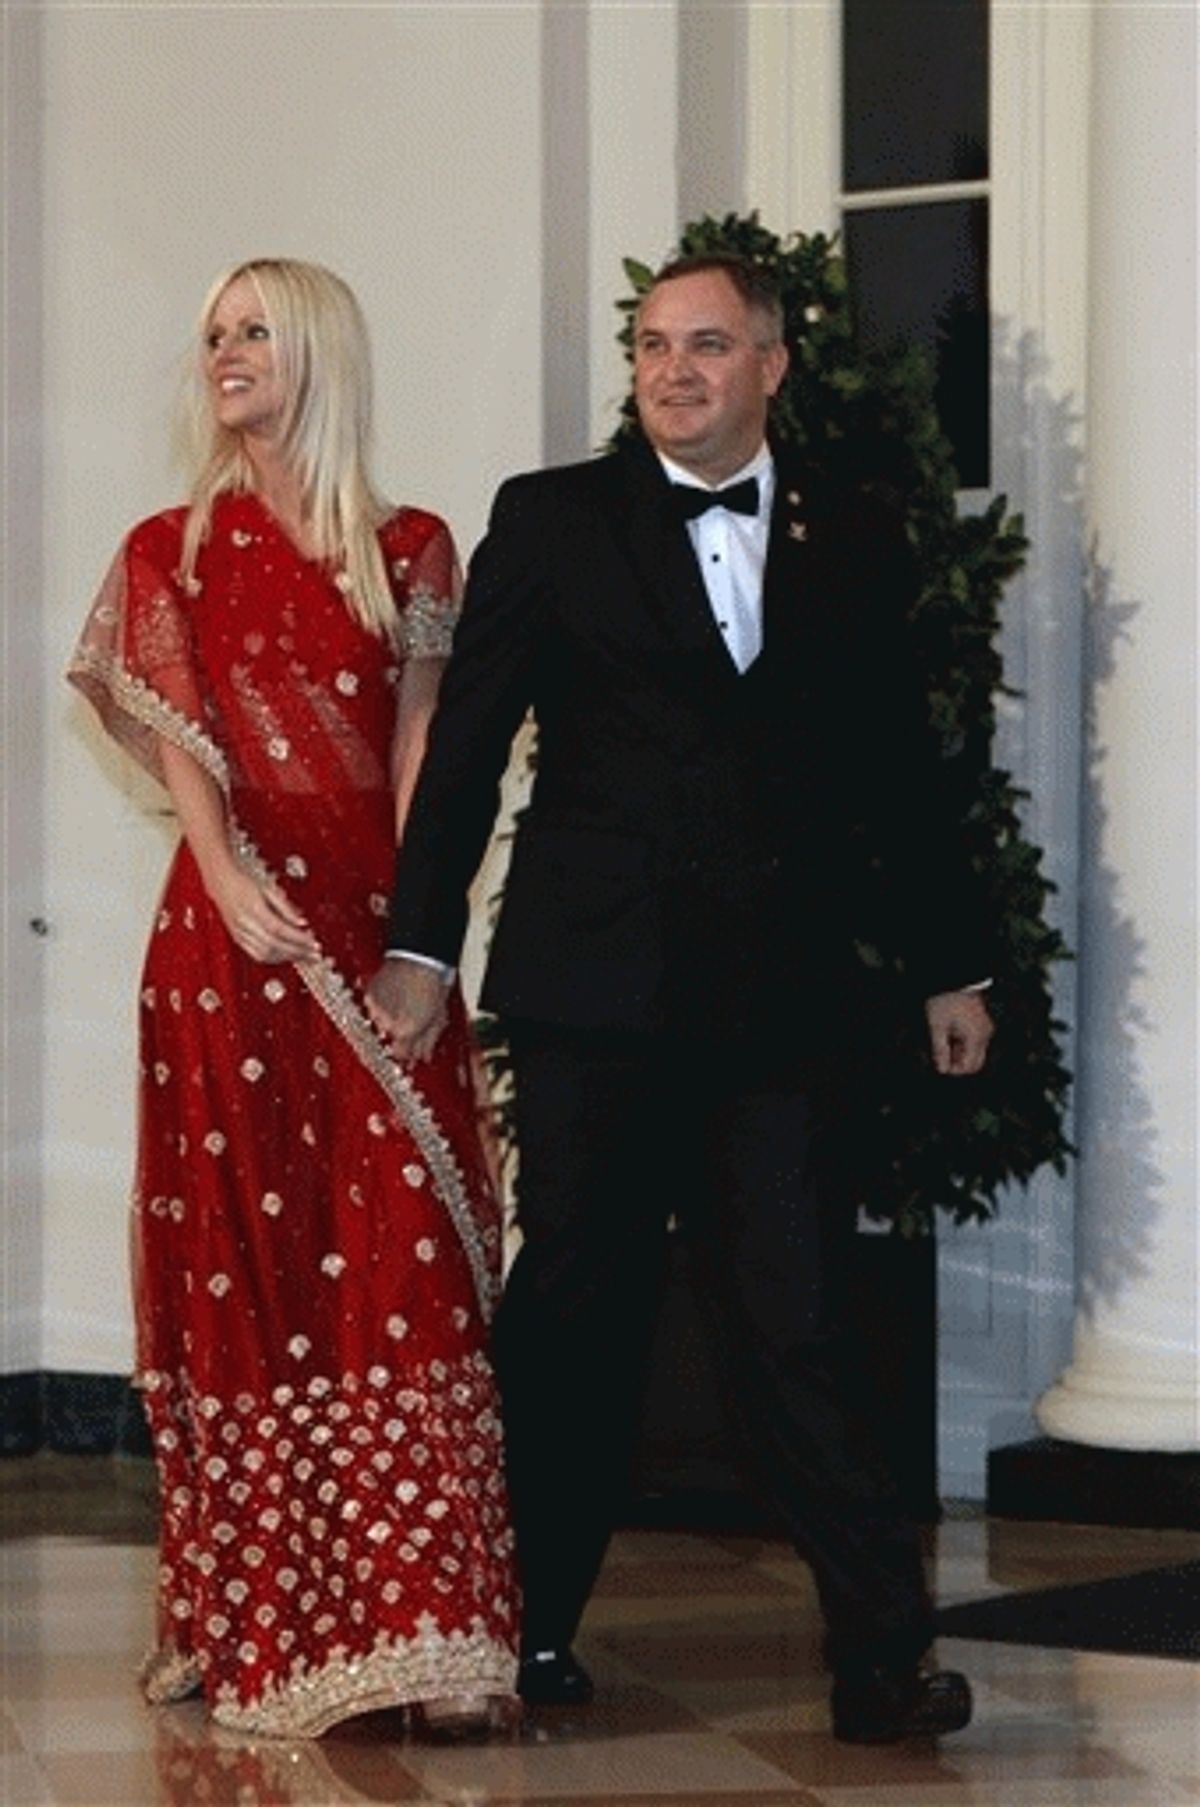 Michaele and Tareq Salahi, right, arrive at a State Dinner hosted by President Barack Obama for Indian Prime Minister Manmohan Singh at the White House in Washington. 